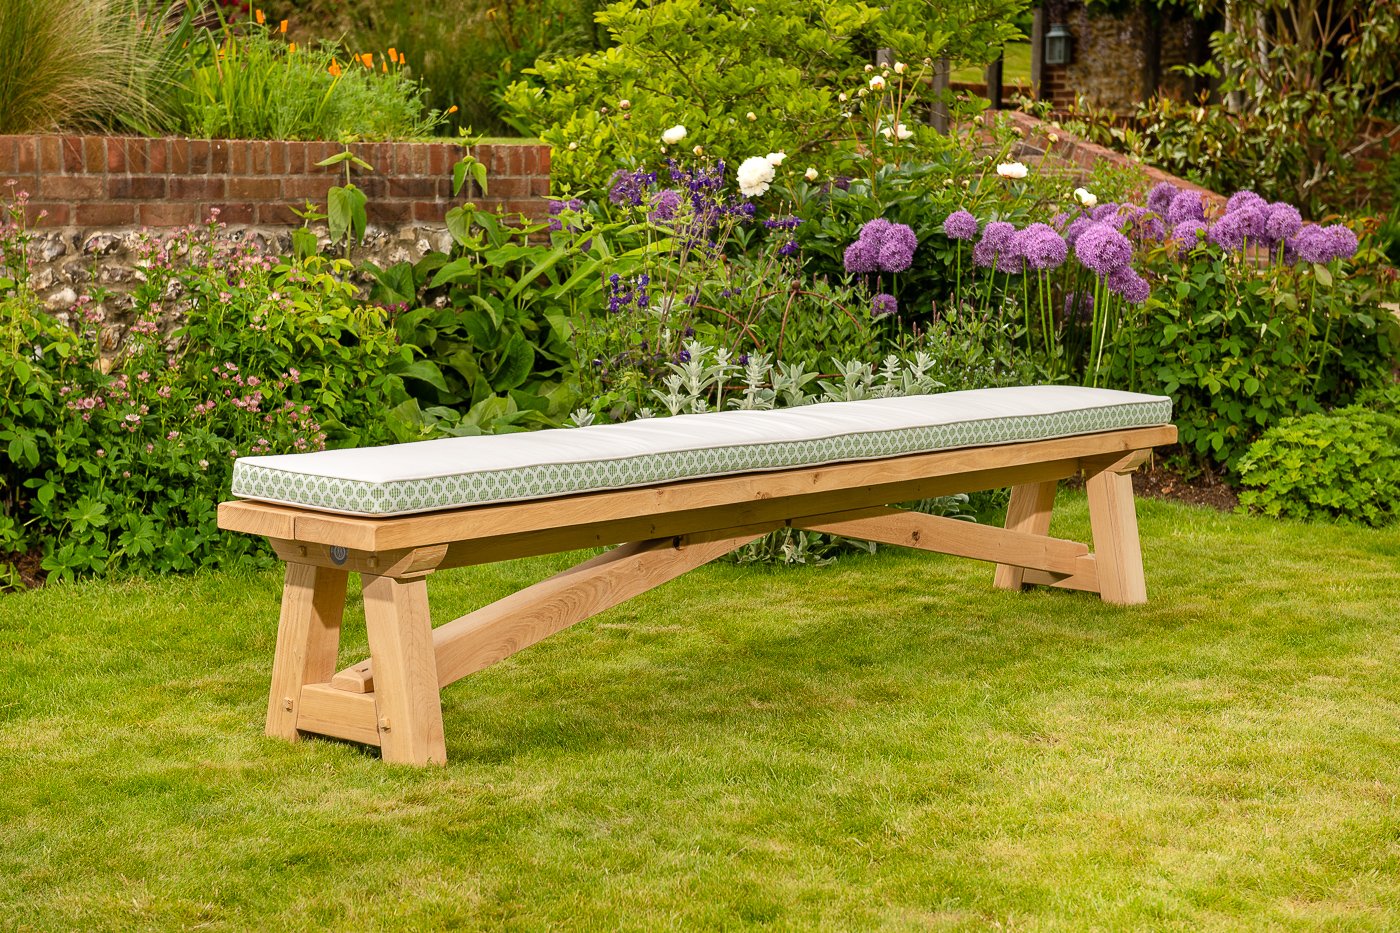 Amelfi green cosmos border bench cushion for Oxenwood